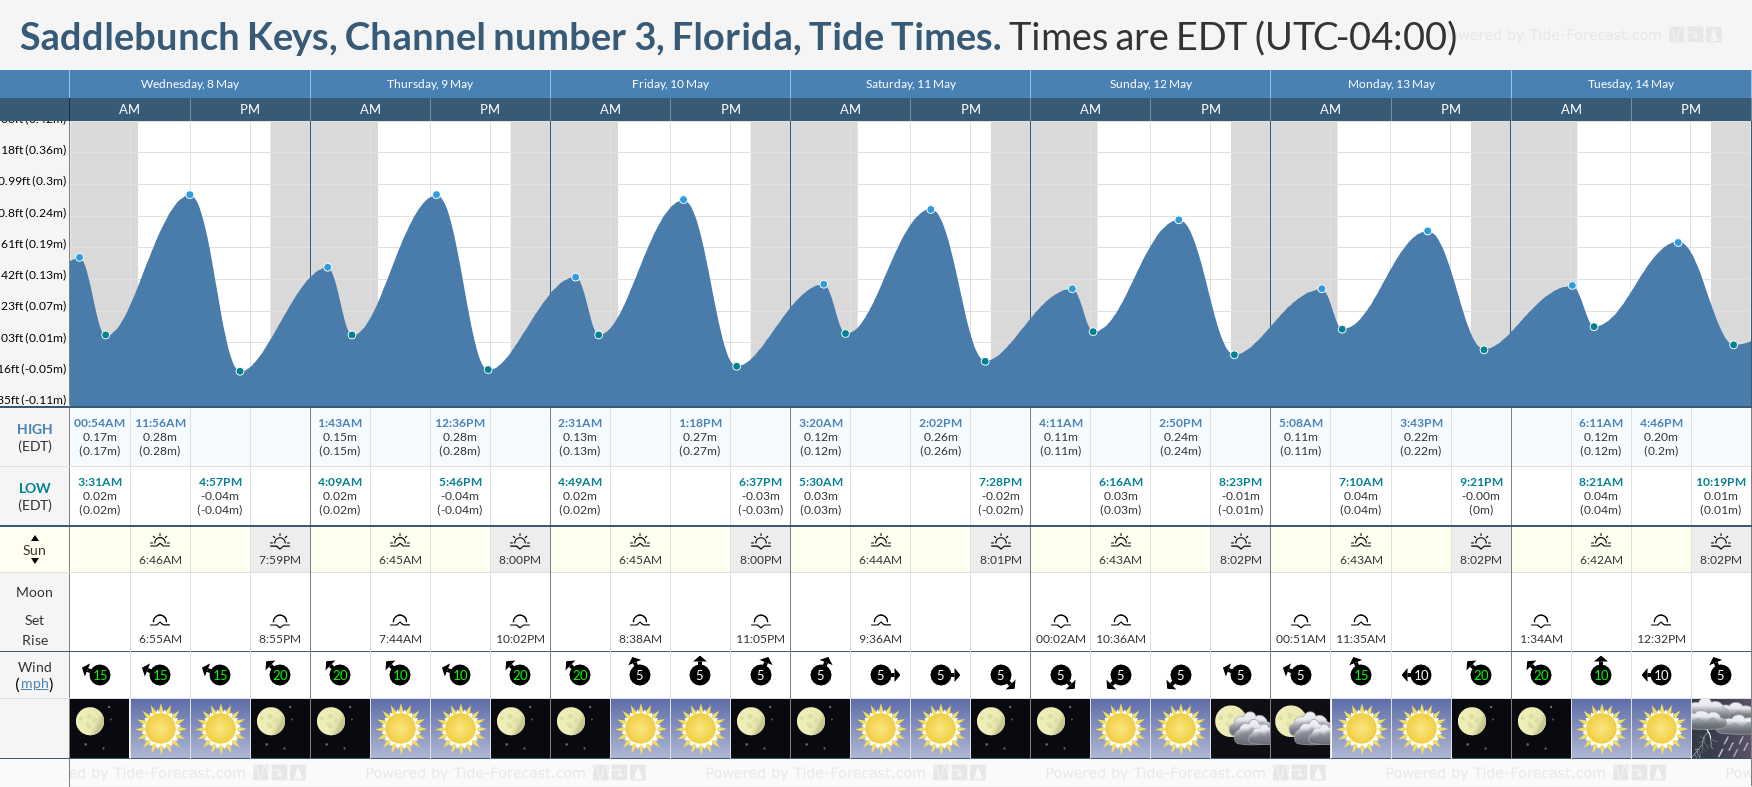 Saddlebunch Keys, Channel number 3, Florida Tide Chart including high and low tide tide times for the next 7 days